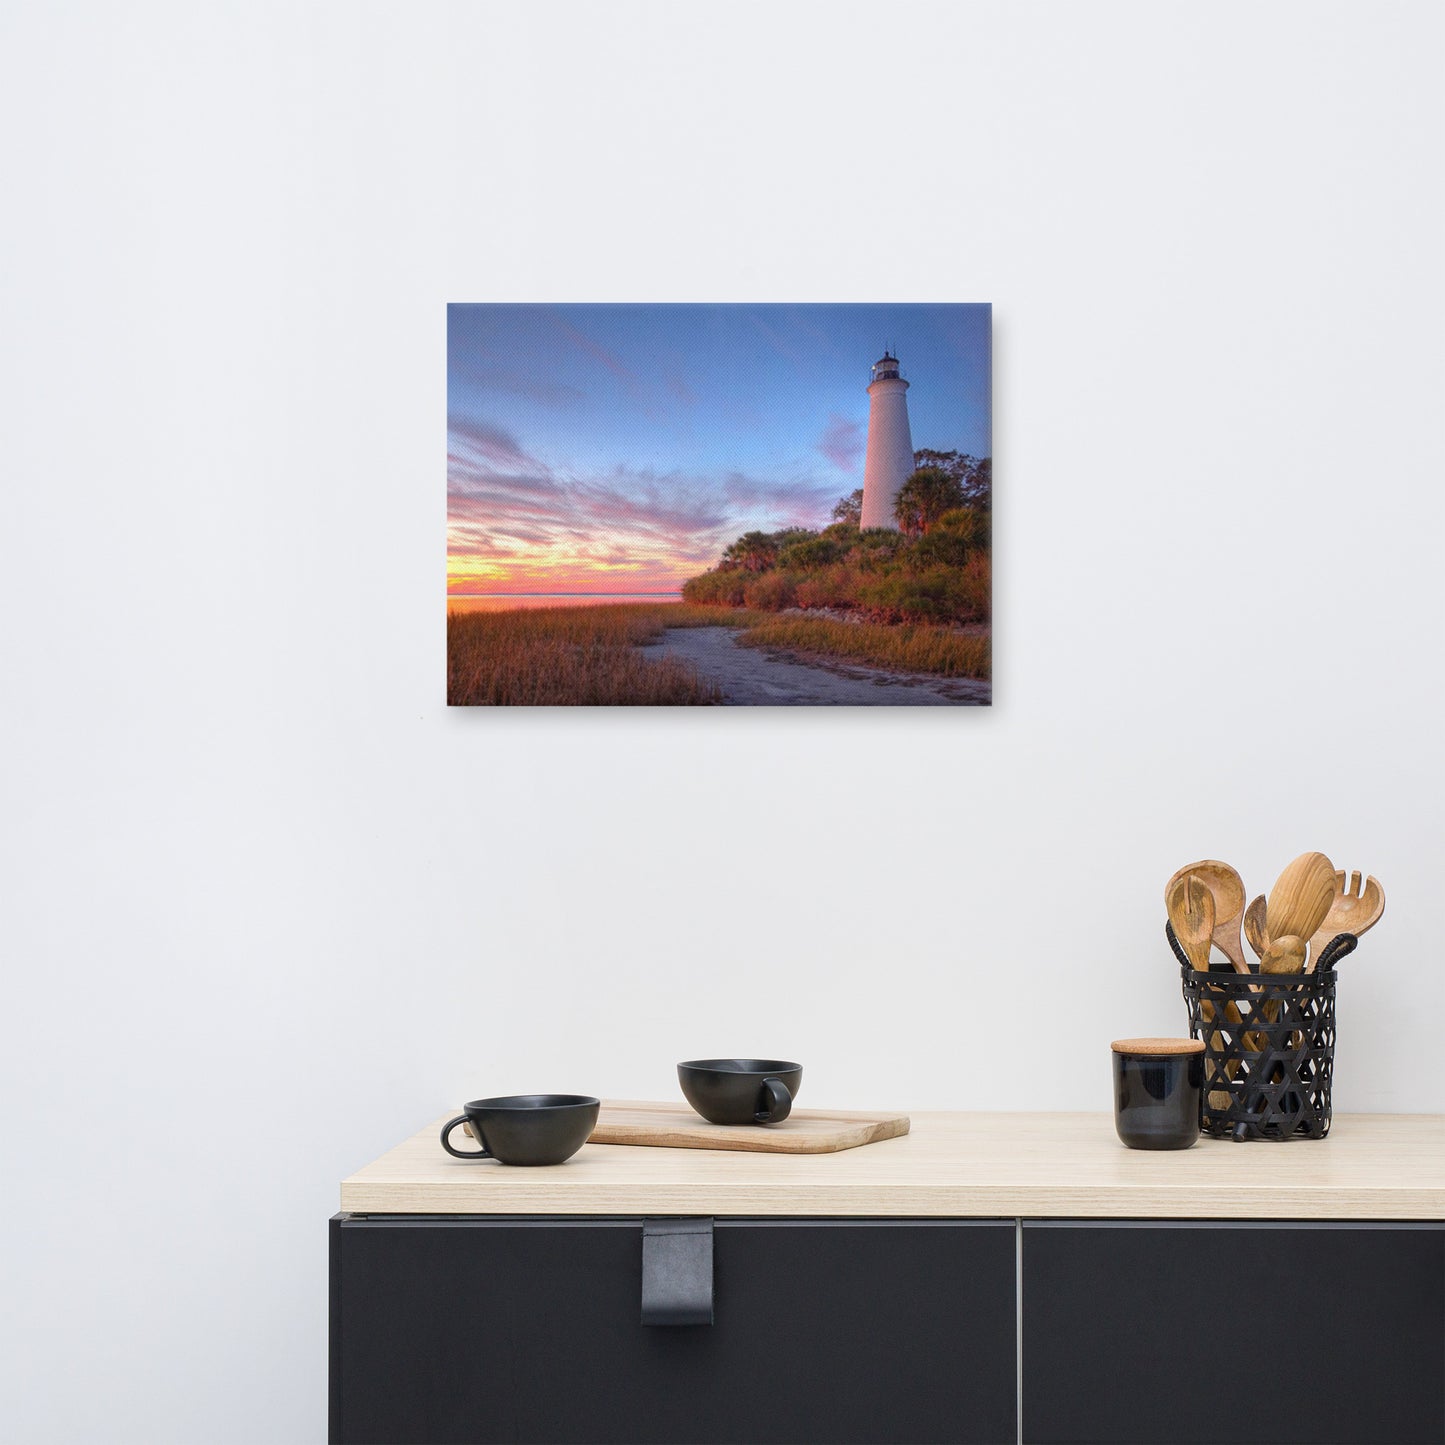 St. Marks Majesty A Beacon of Tranquility Lighthouse Architectural Coastal Beach Photograph Wall Art print